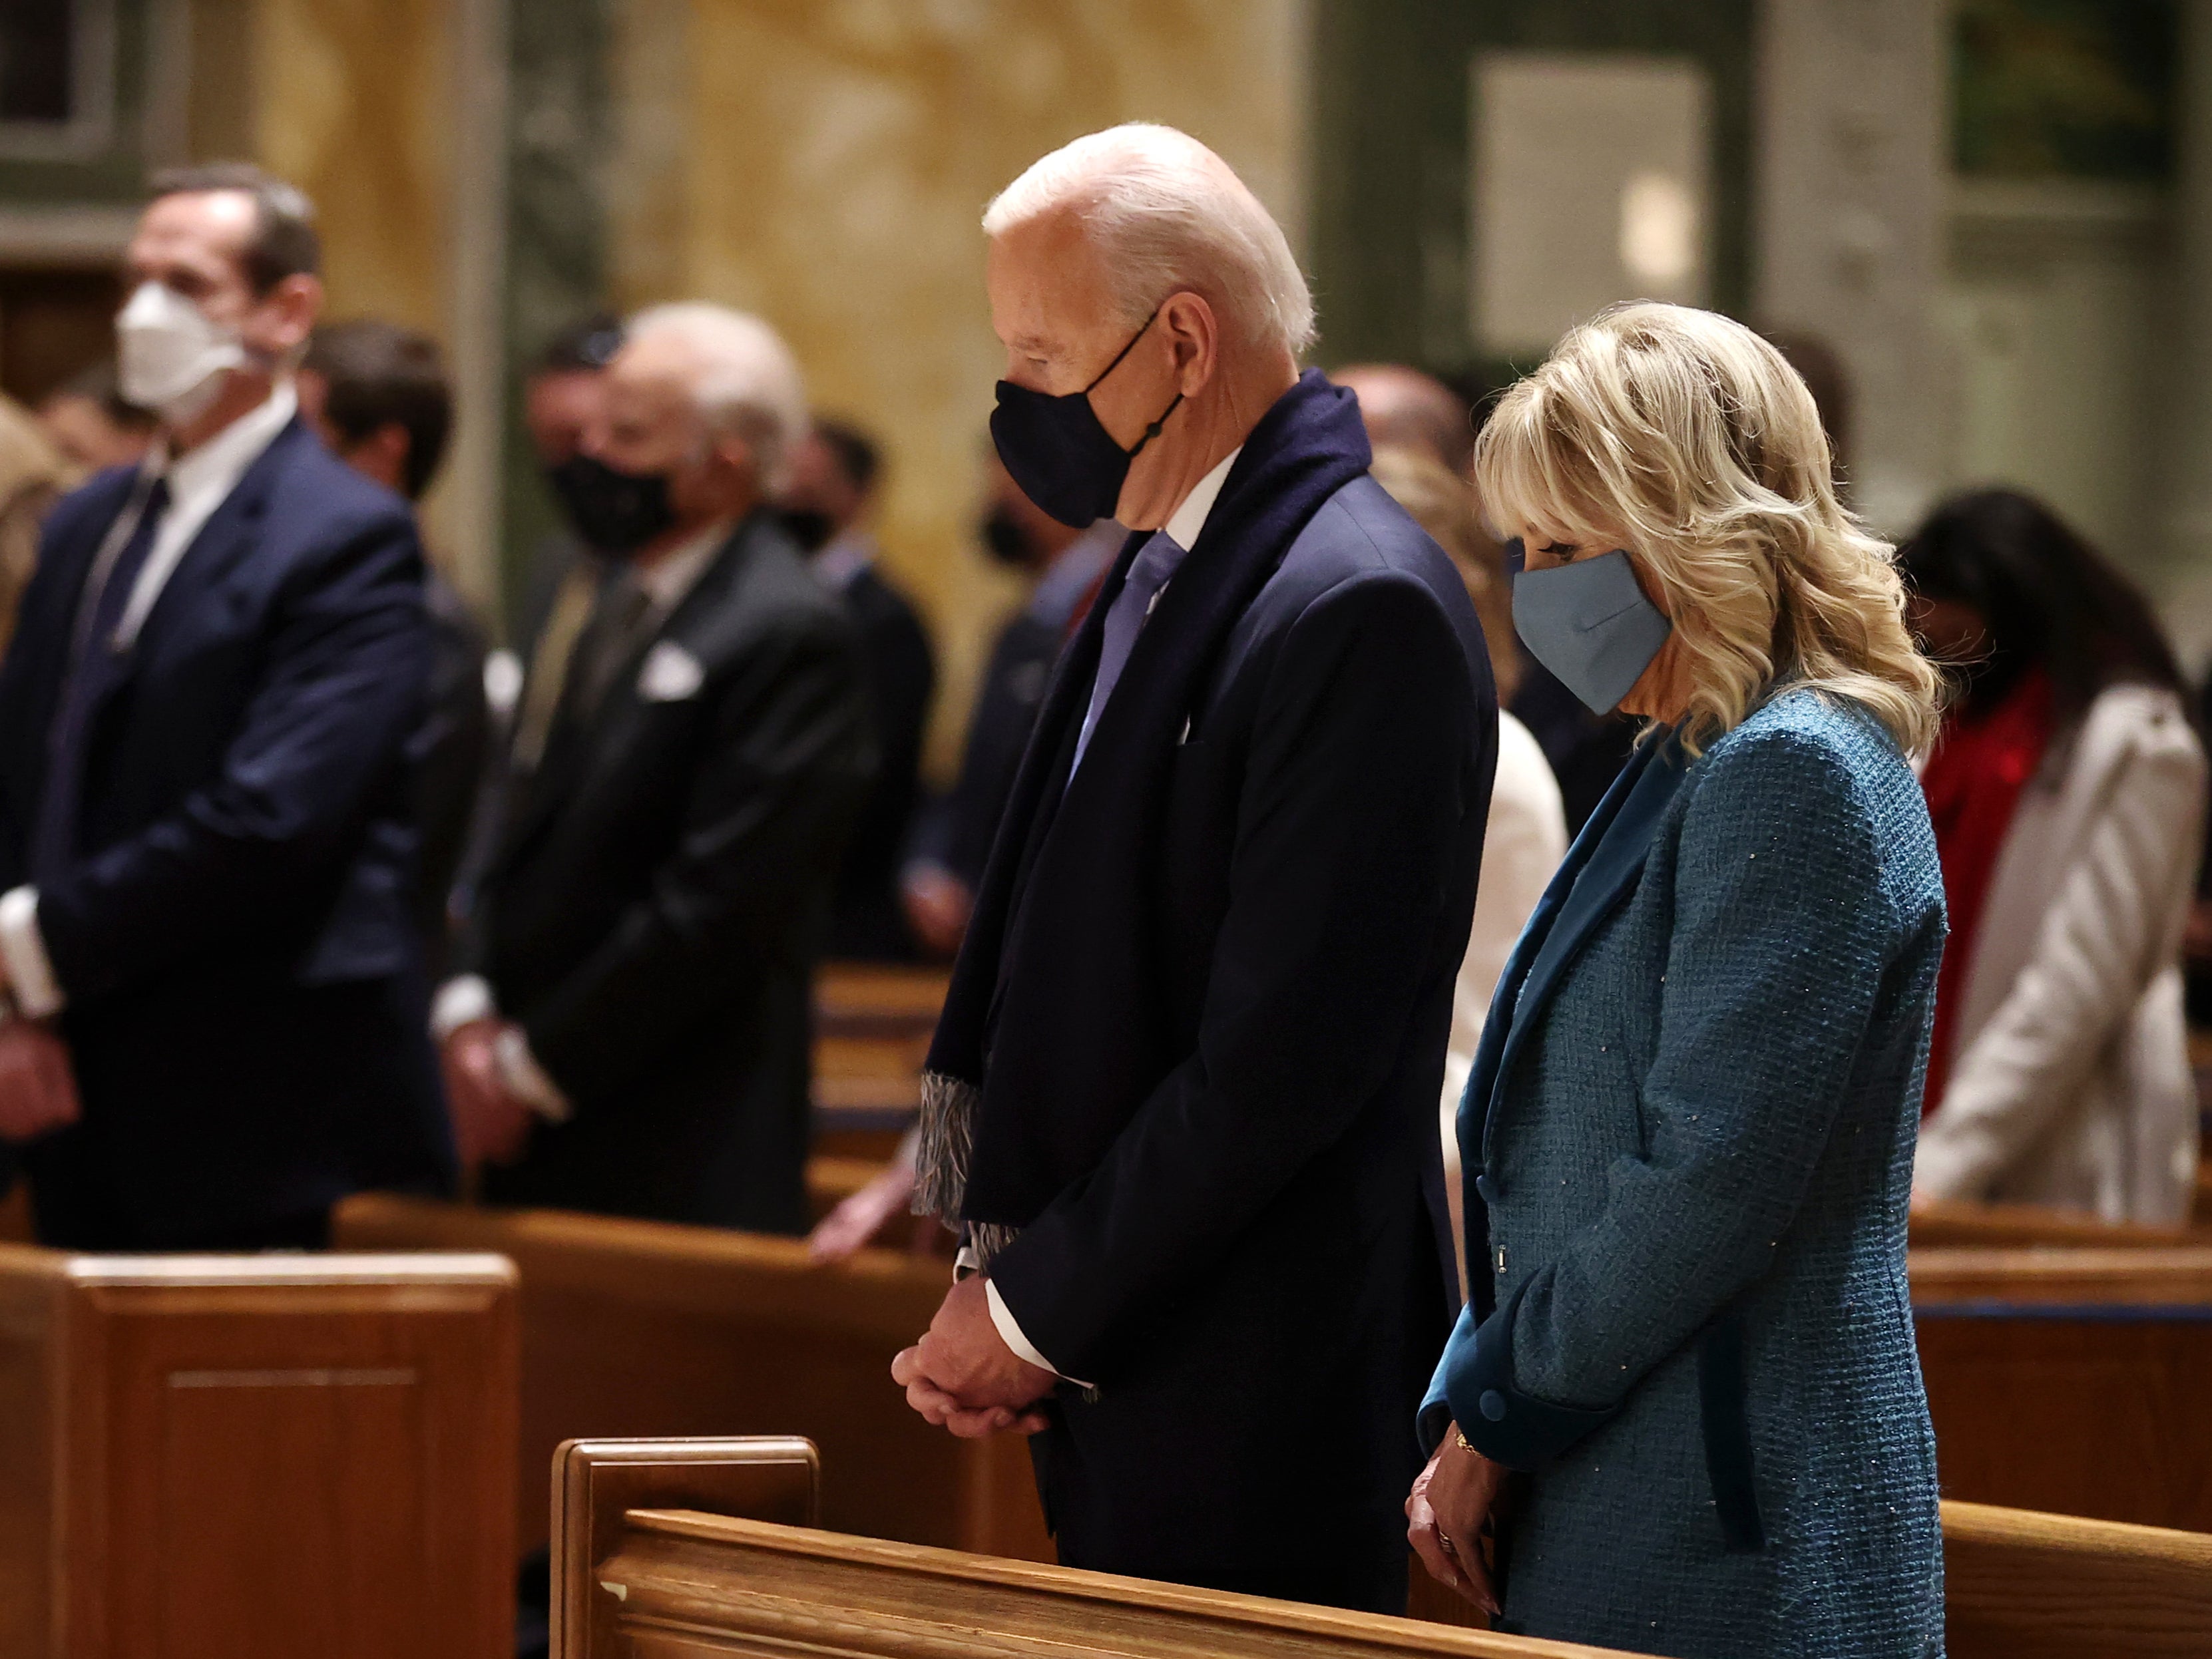 Joe Biden and Jill Biden attend services at the Cathedral of St Matthew the Apostle ahead of the presidential inauguration ceremony. Once inaugurated, Mr Biden will be the second Catholic president in US history and the first since John F Kennedy